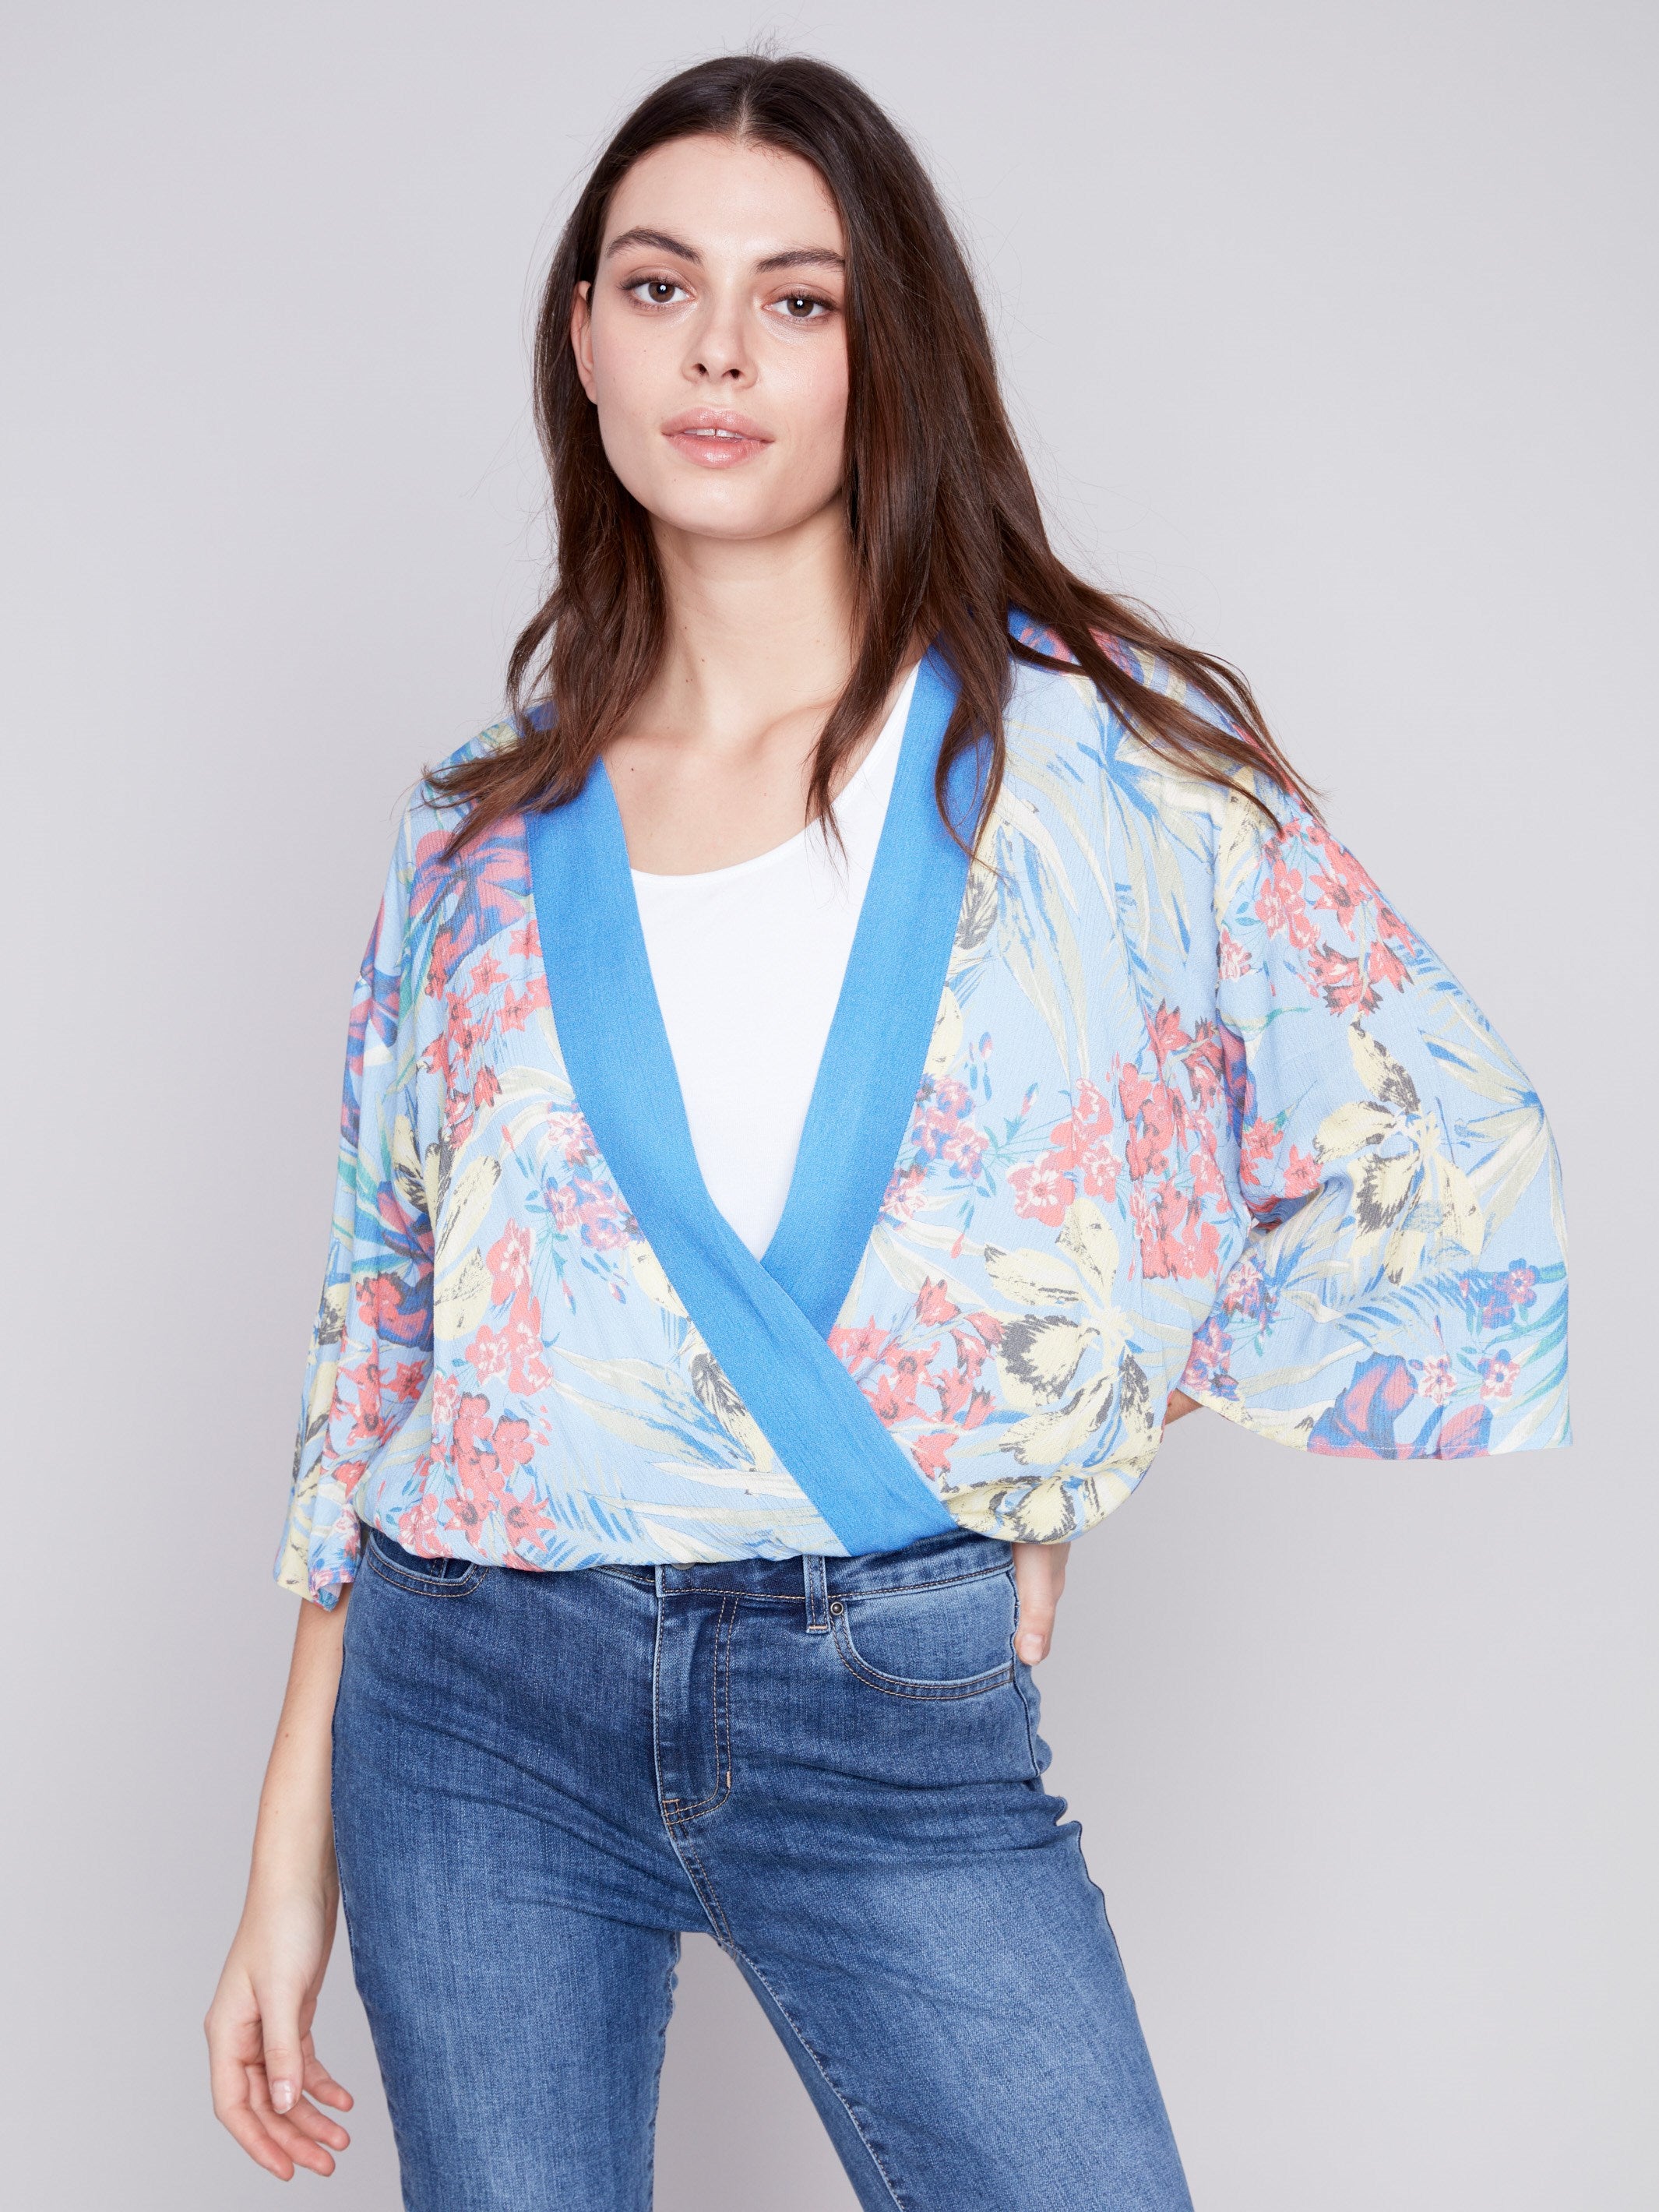 Printed Overlap Blouse - Lillypad - Charlie B Collection Canada - Image 3